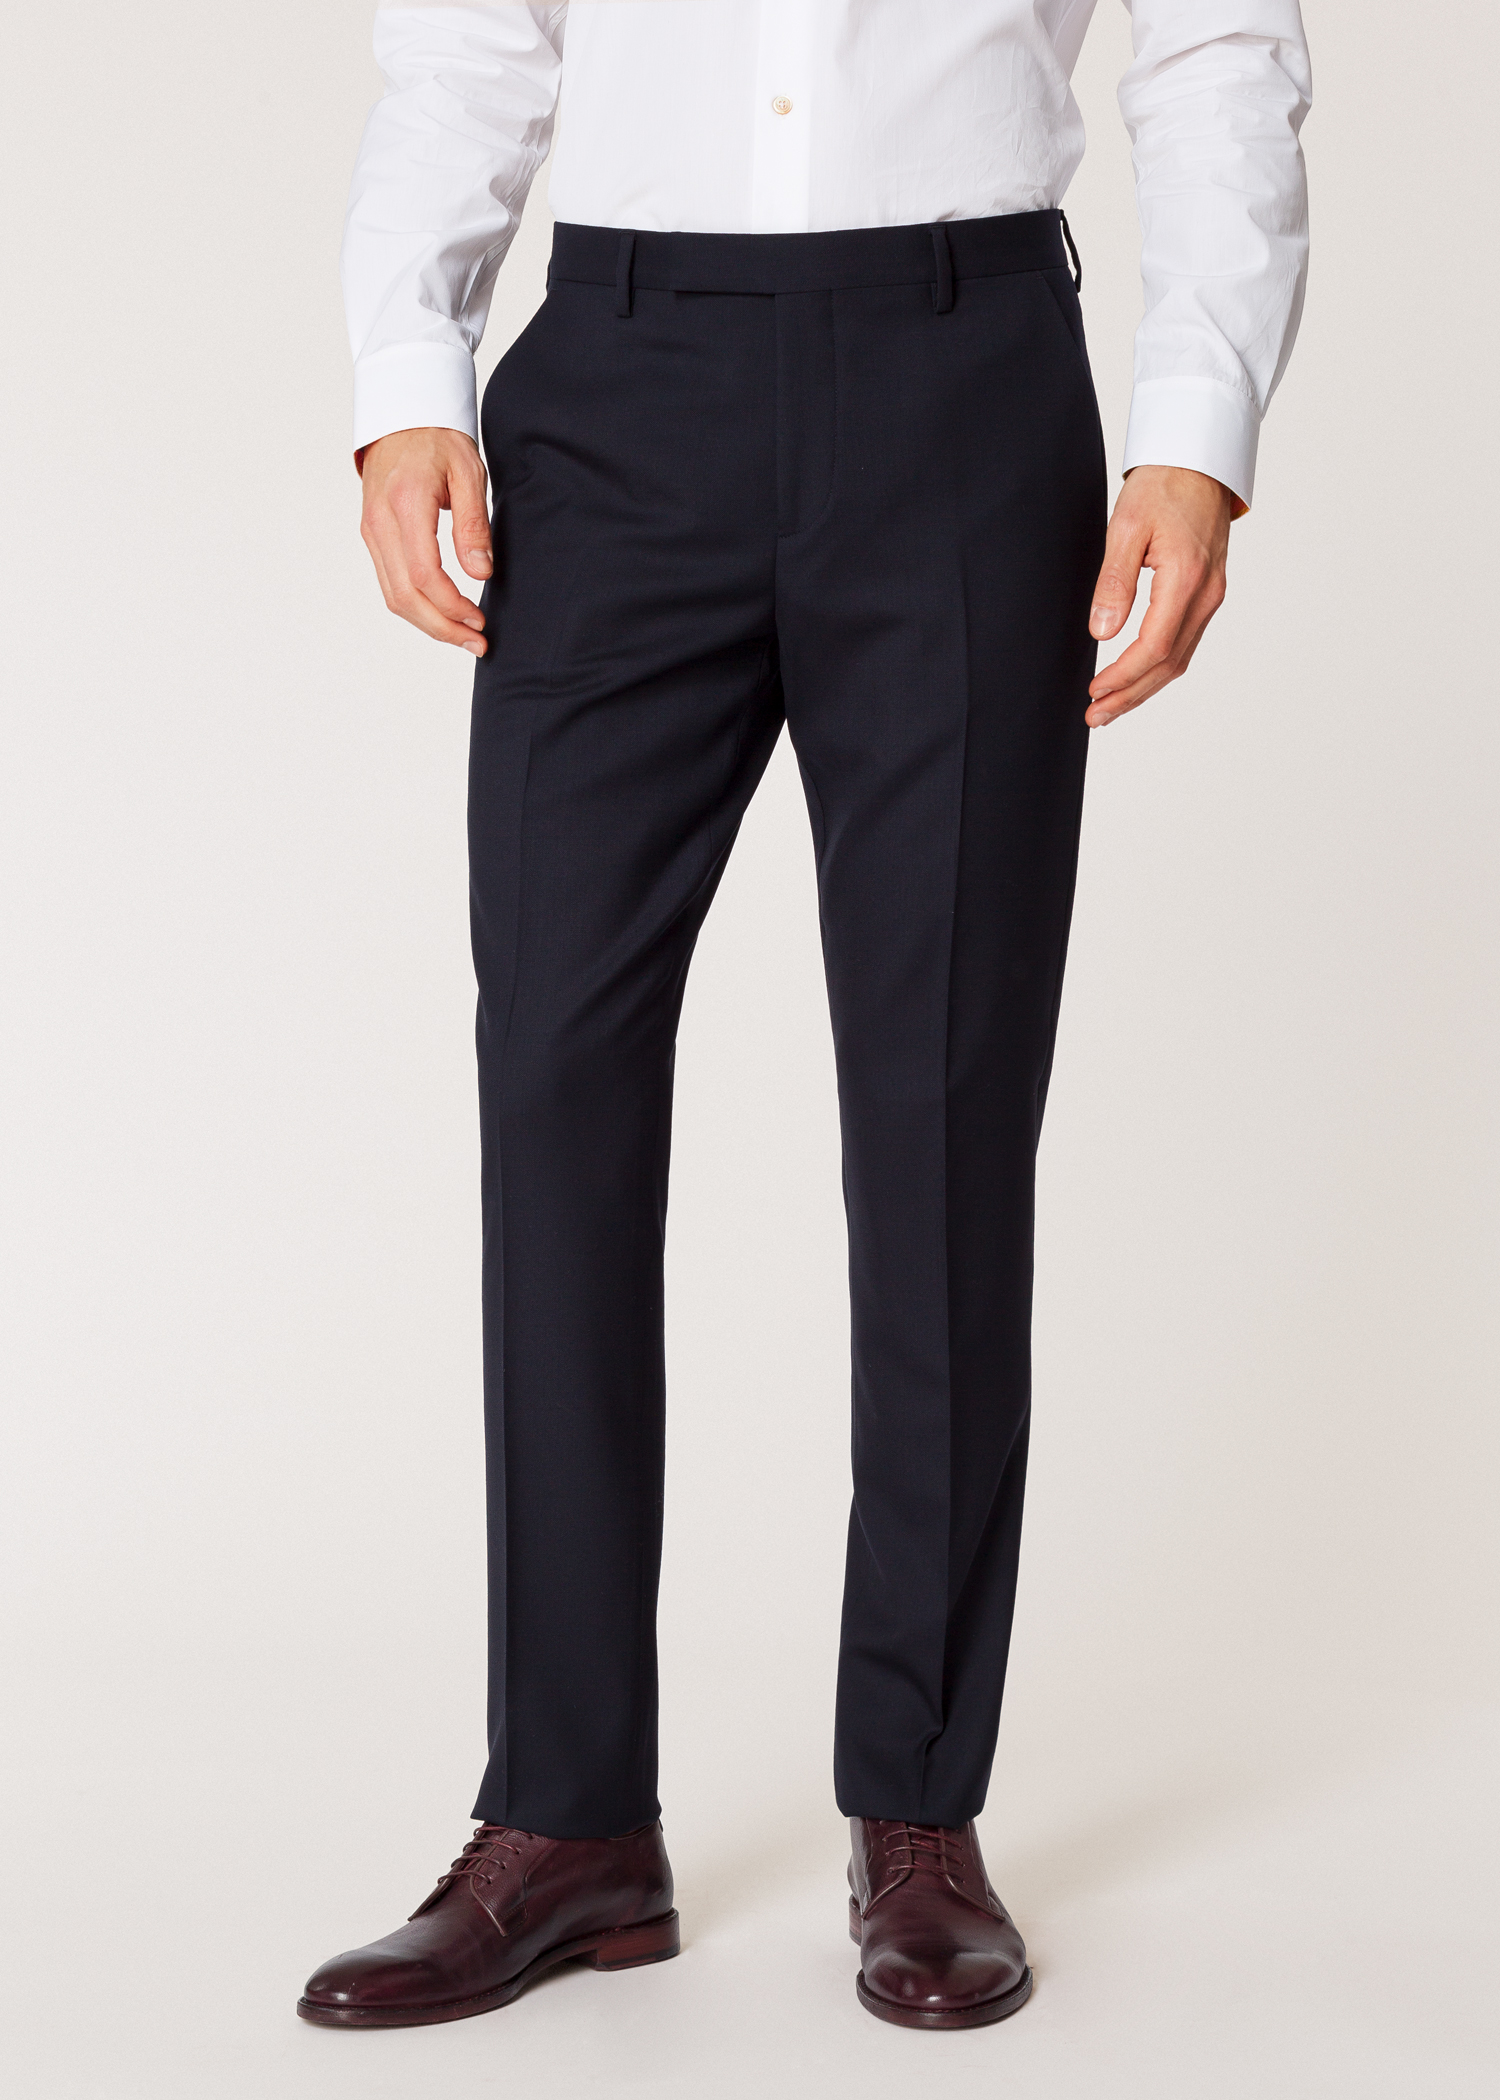 Men's Slim-Fit Navy Wool 'A Suit To Travel In' Trousers - Paul Smith